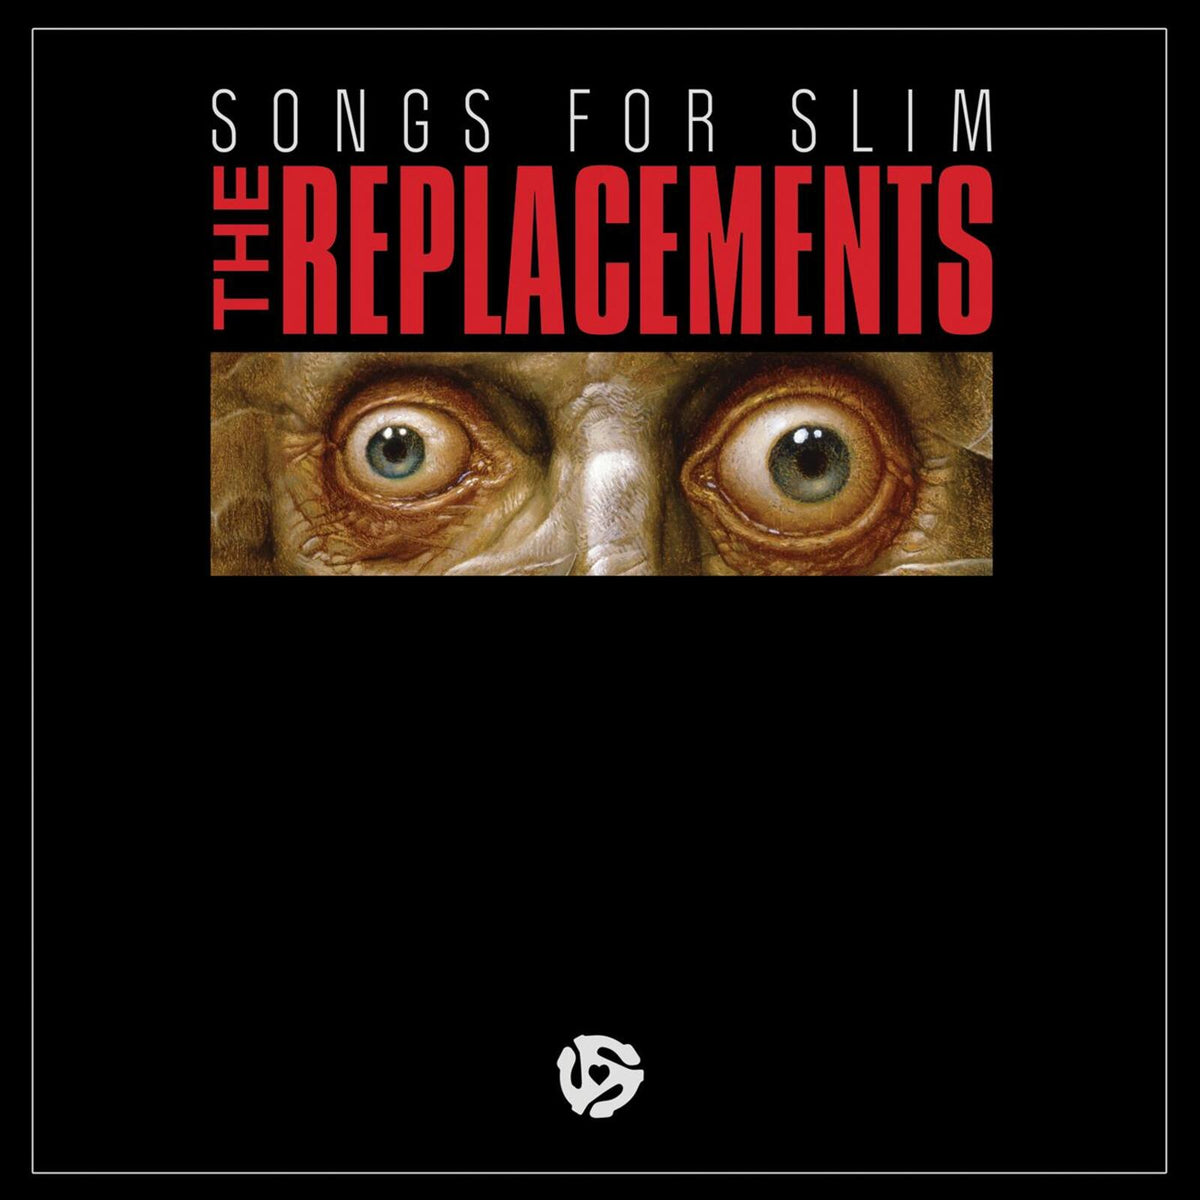 The Replacements - Songs For Slim - LPNW5785C